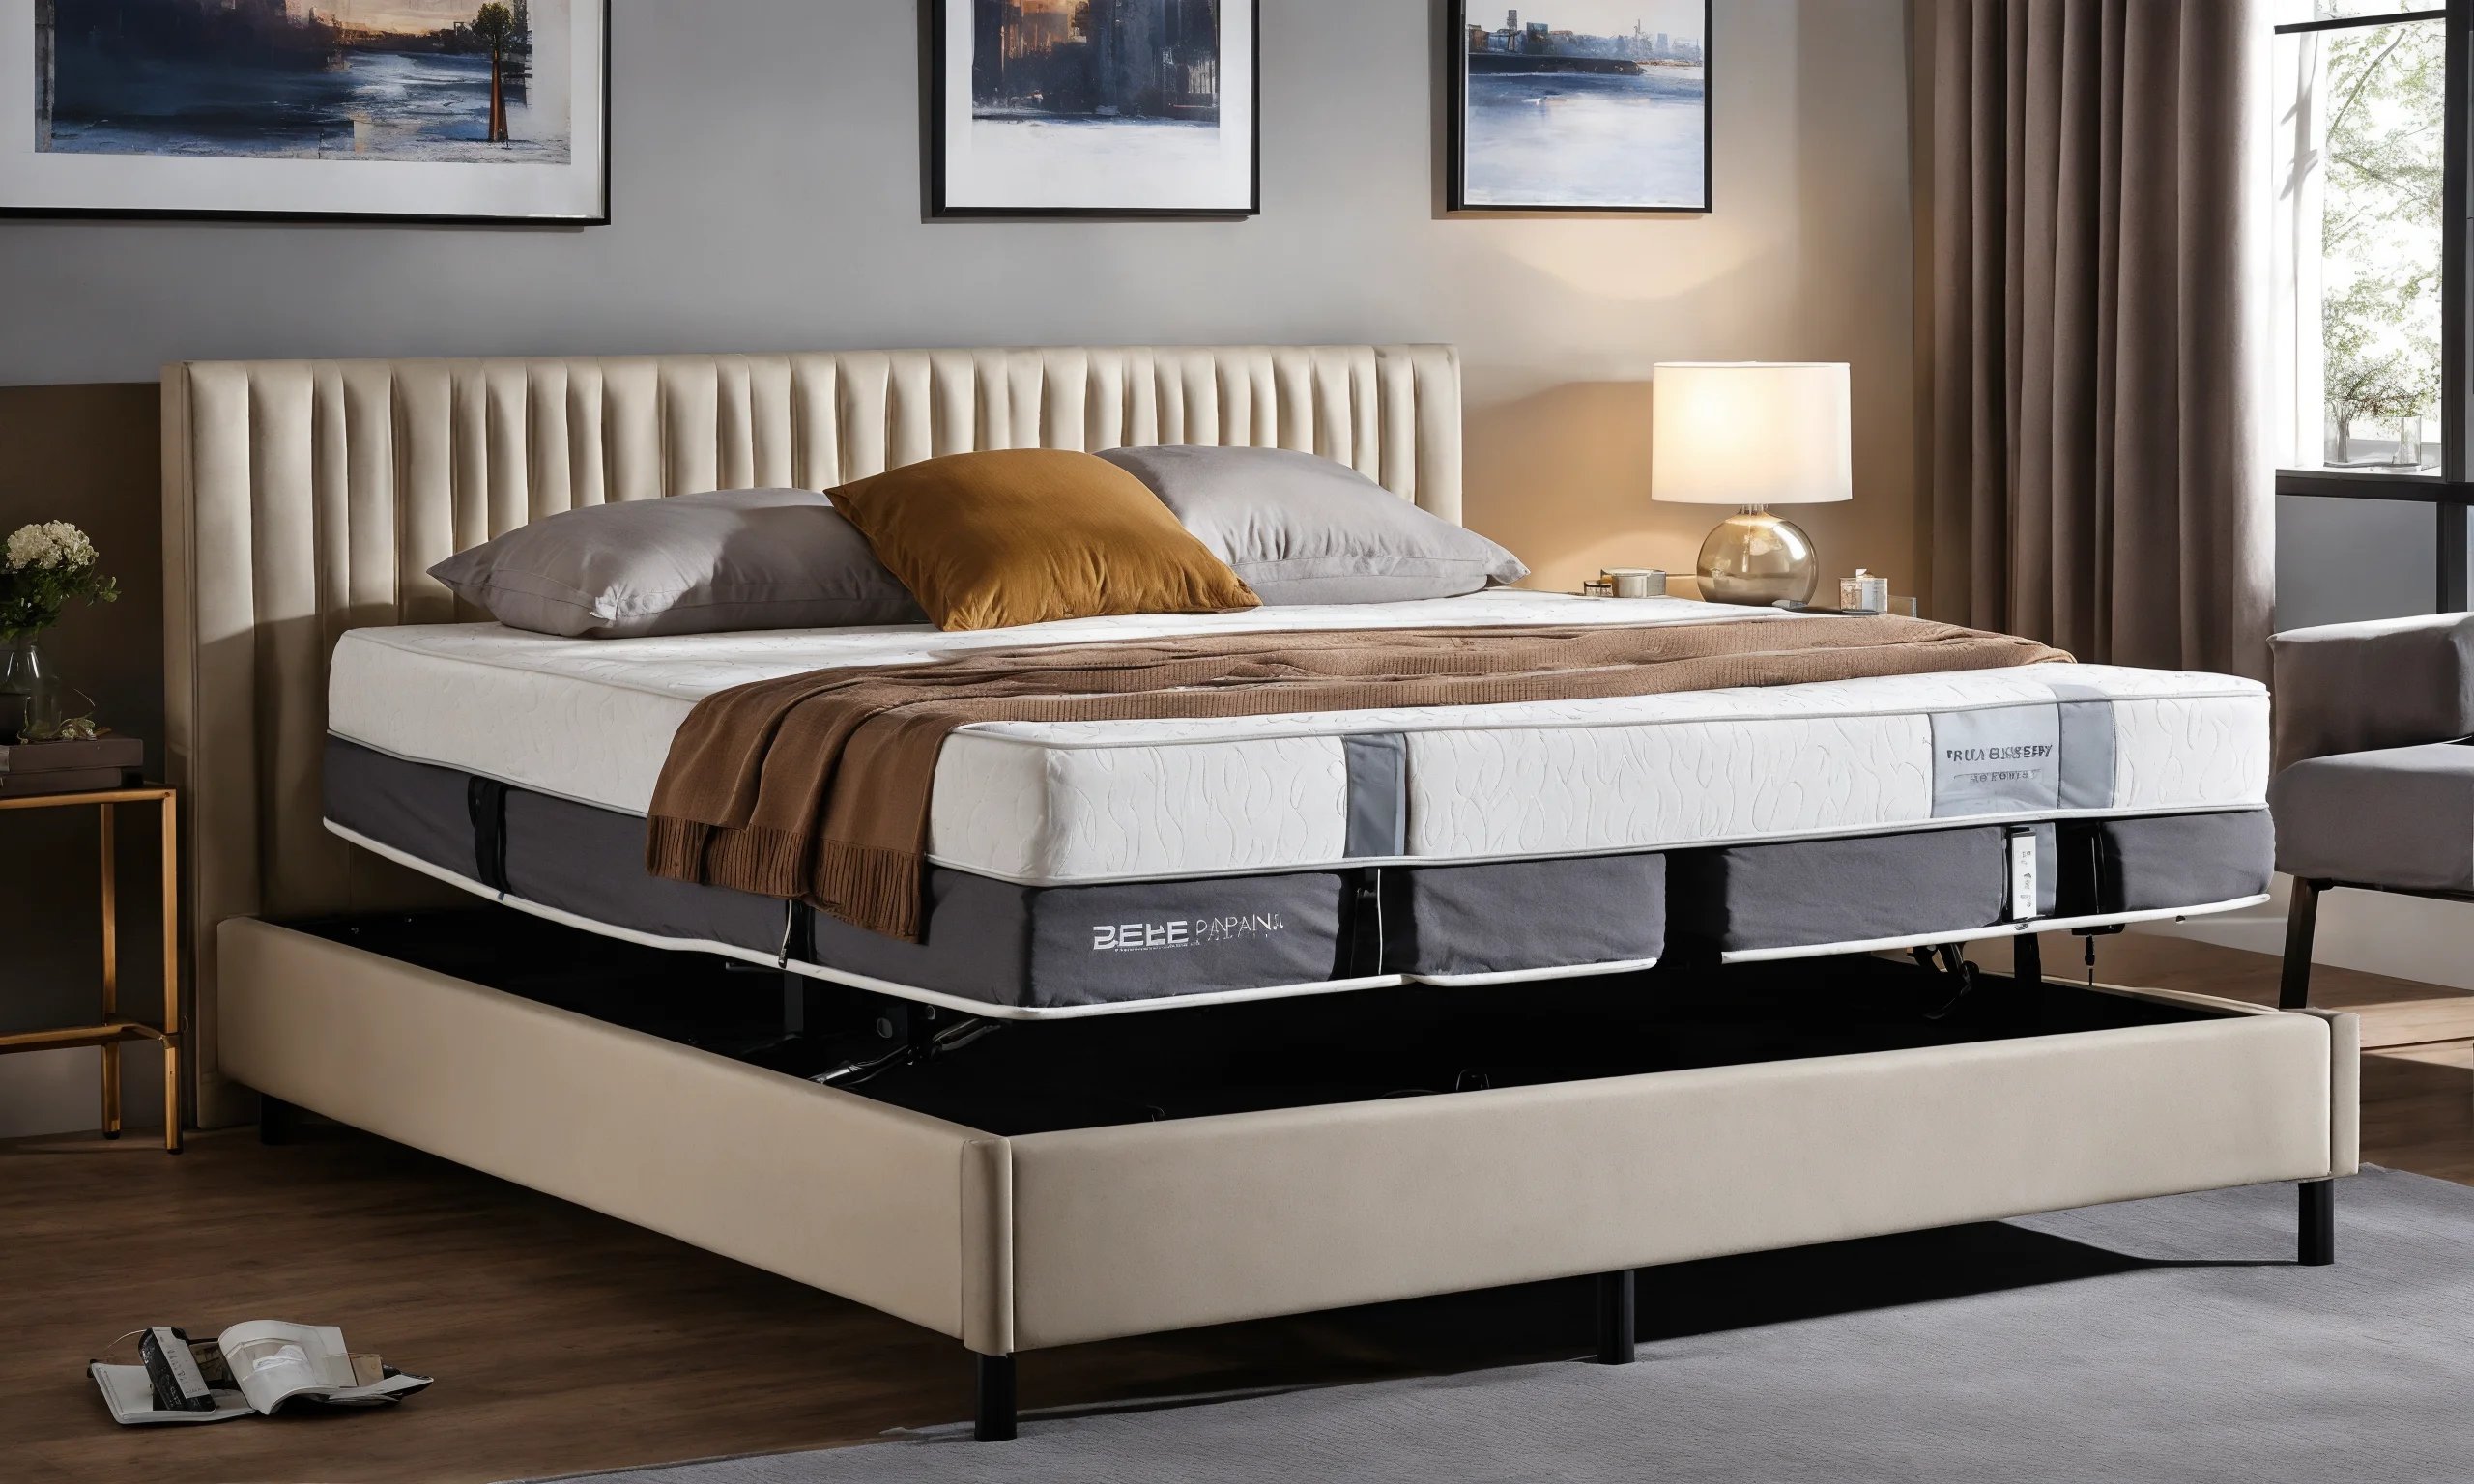 How to Choose a Bedskirt for an Adjustable Bed